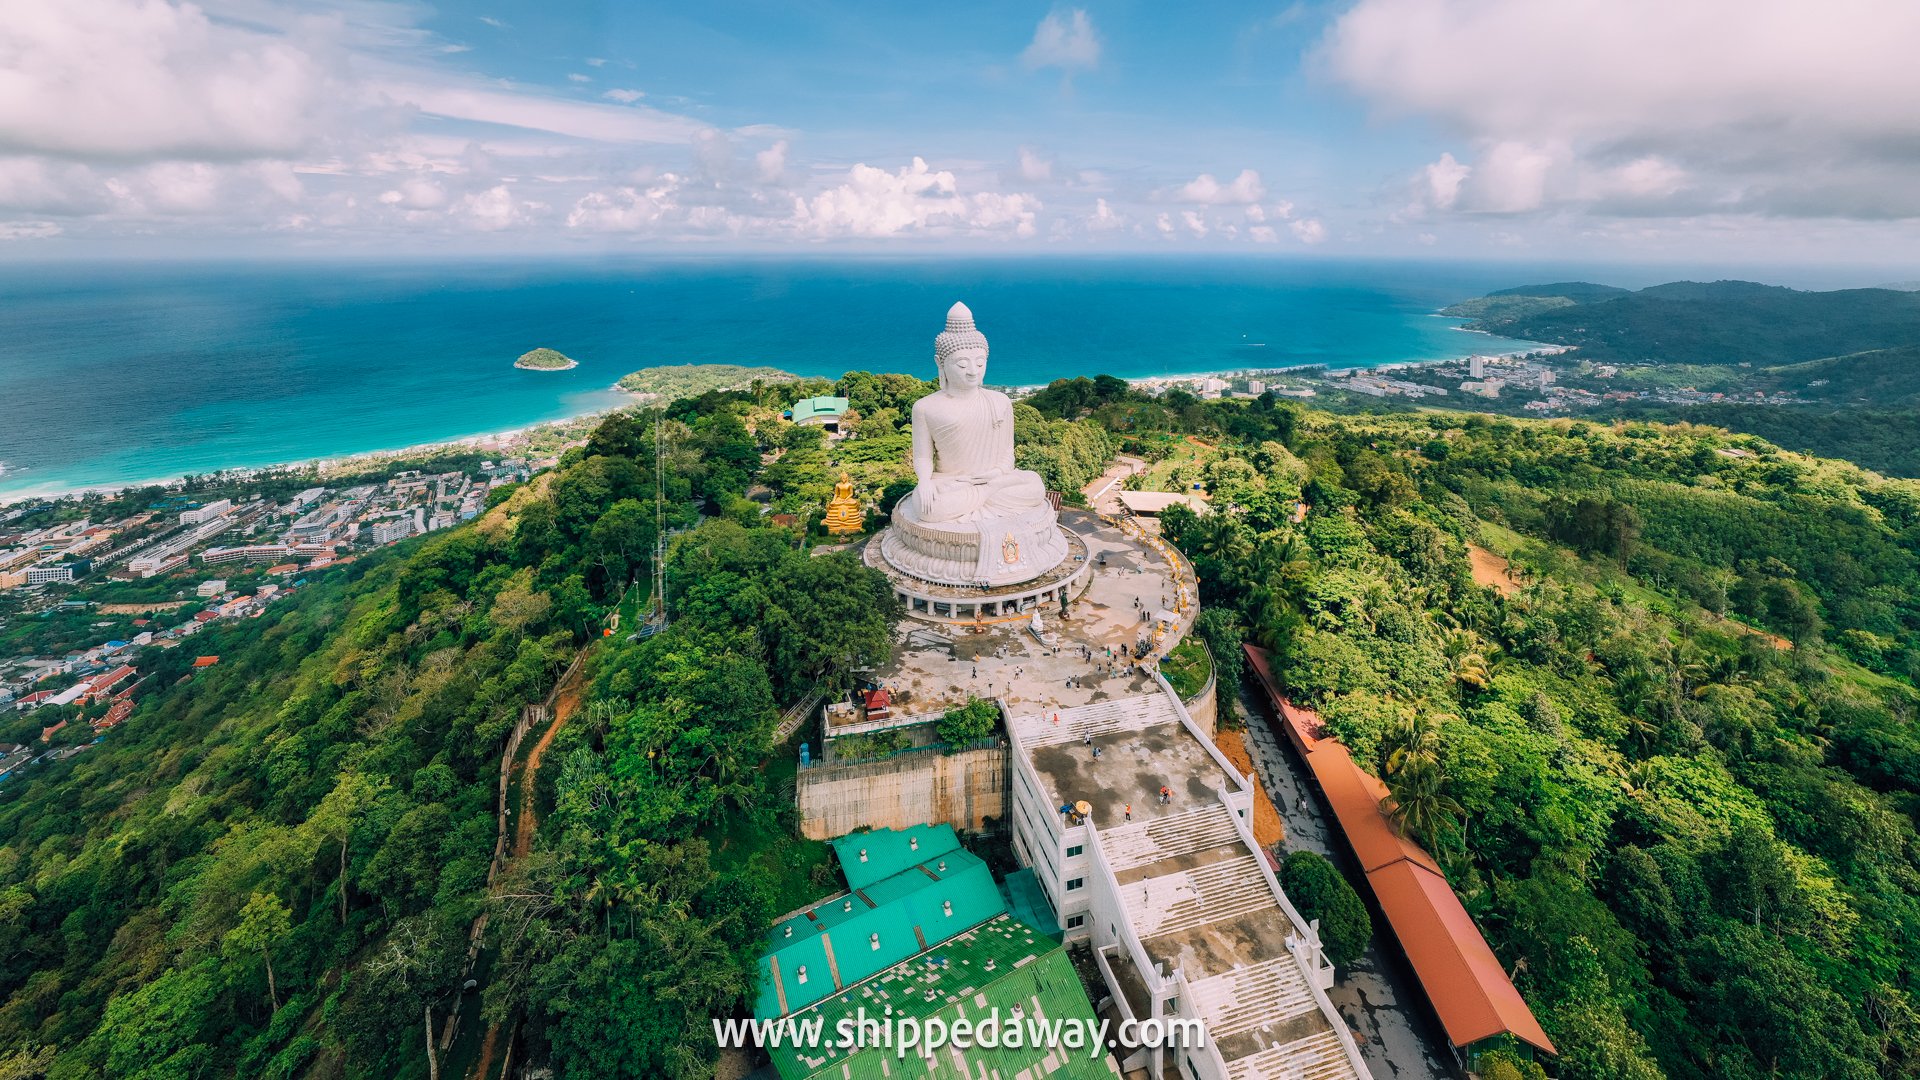 Drone aerial view of the Big Buddha in Phuket Thailand, Best Viewpoints in Phuket Thailand, Big Buddha Viewpoint Phuket